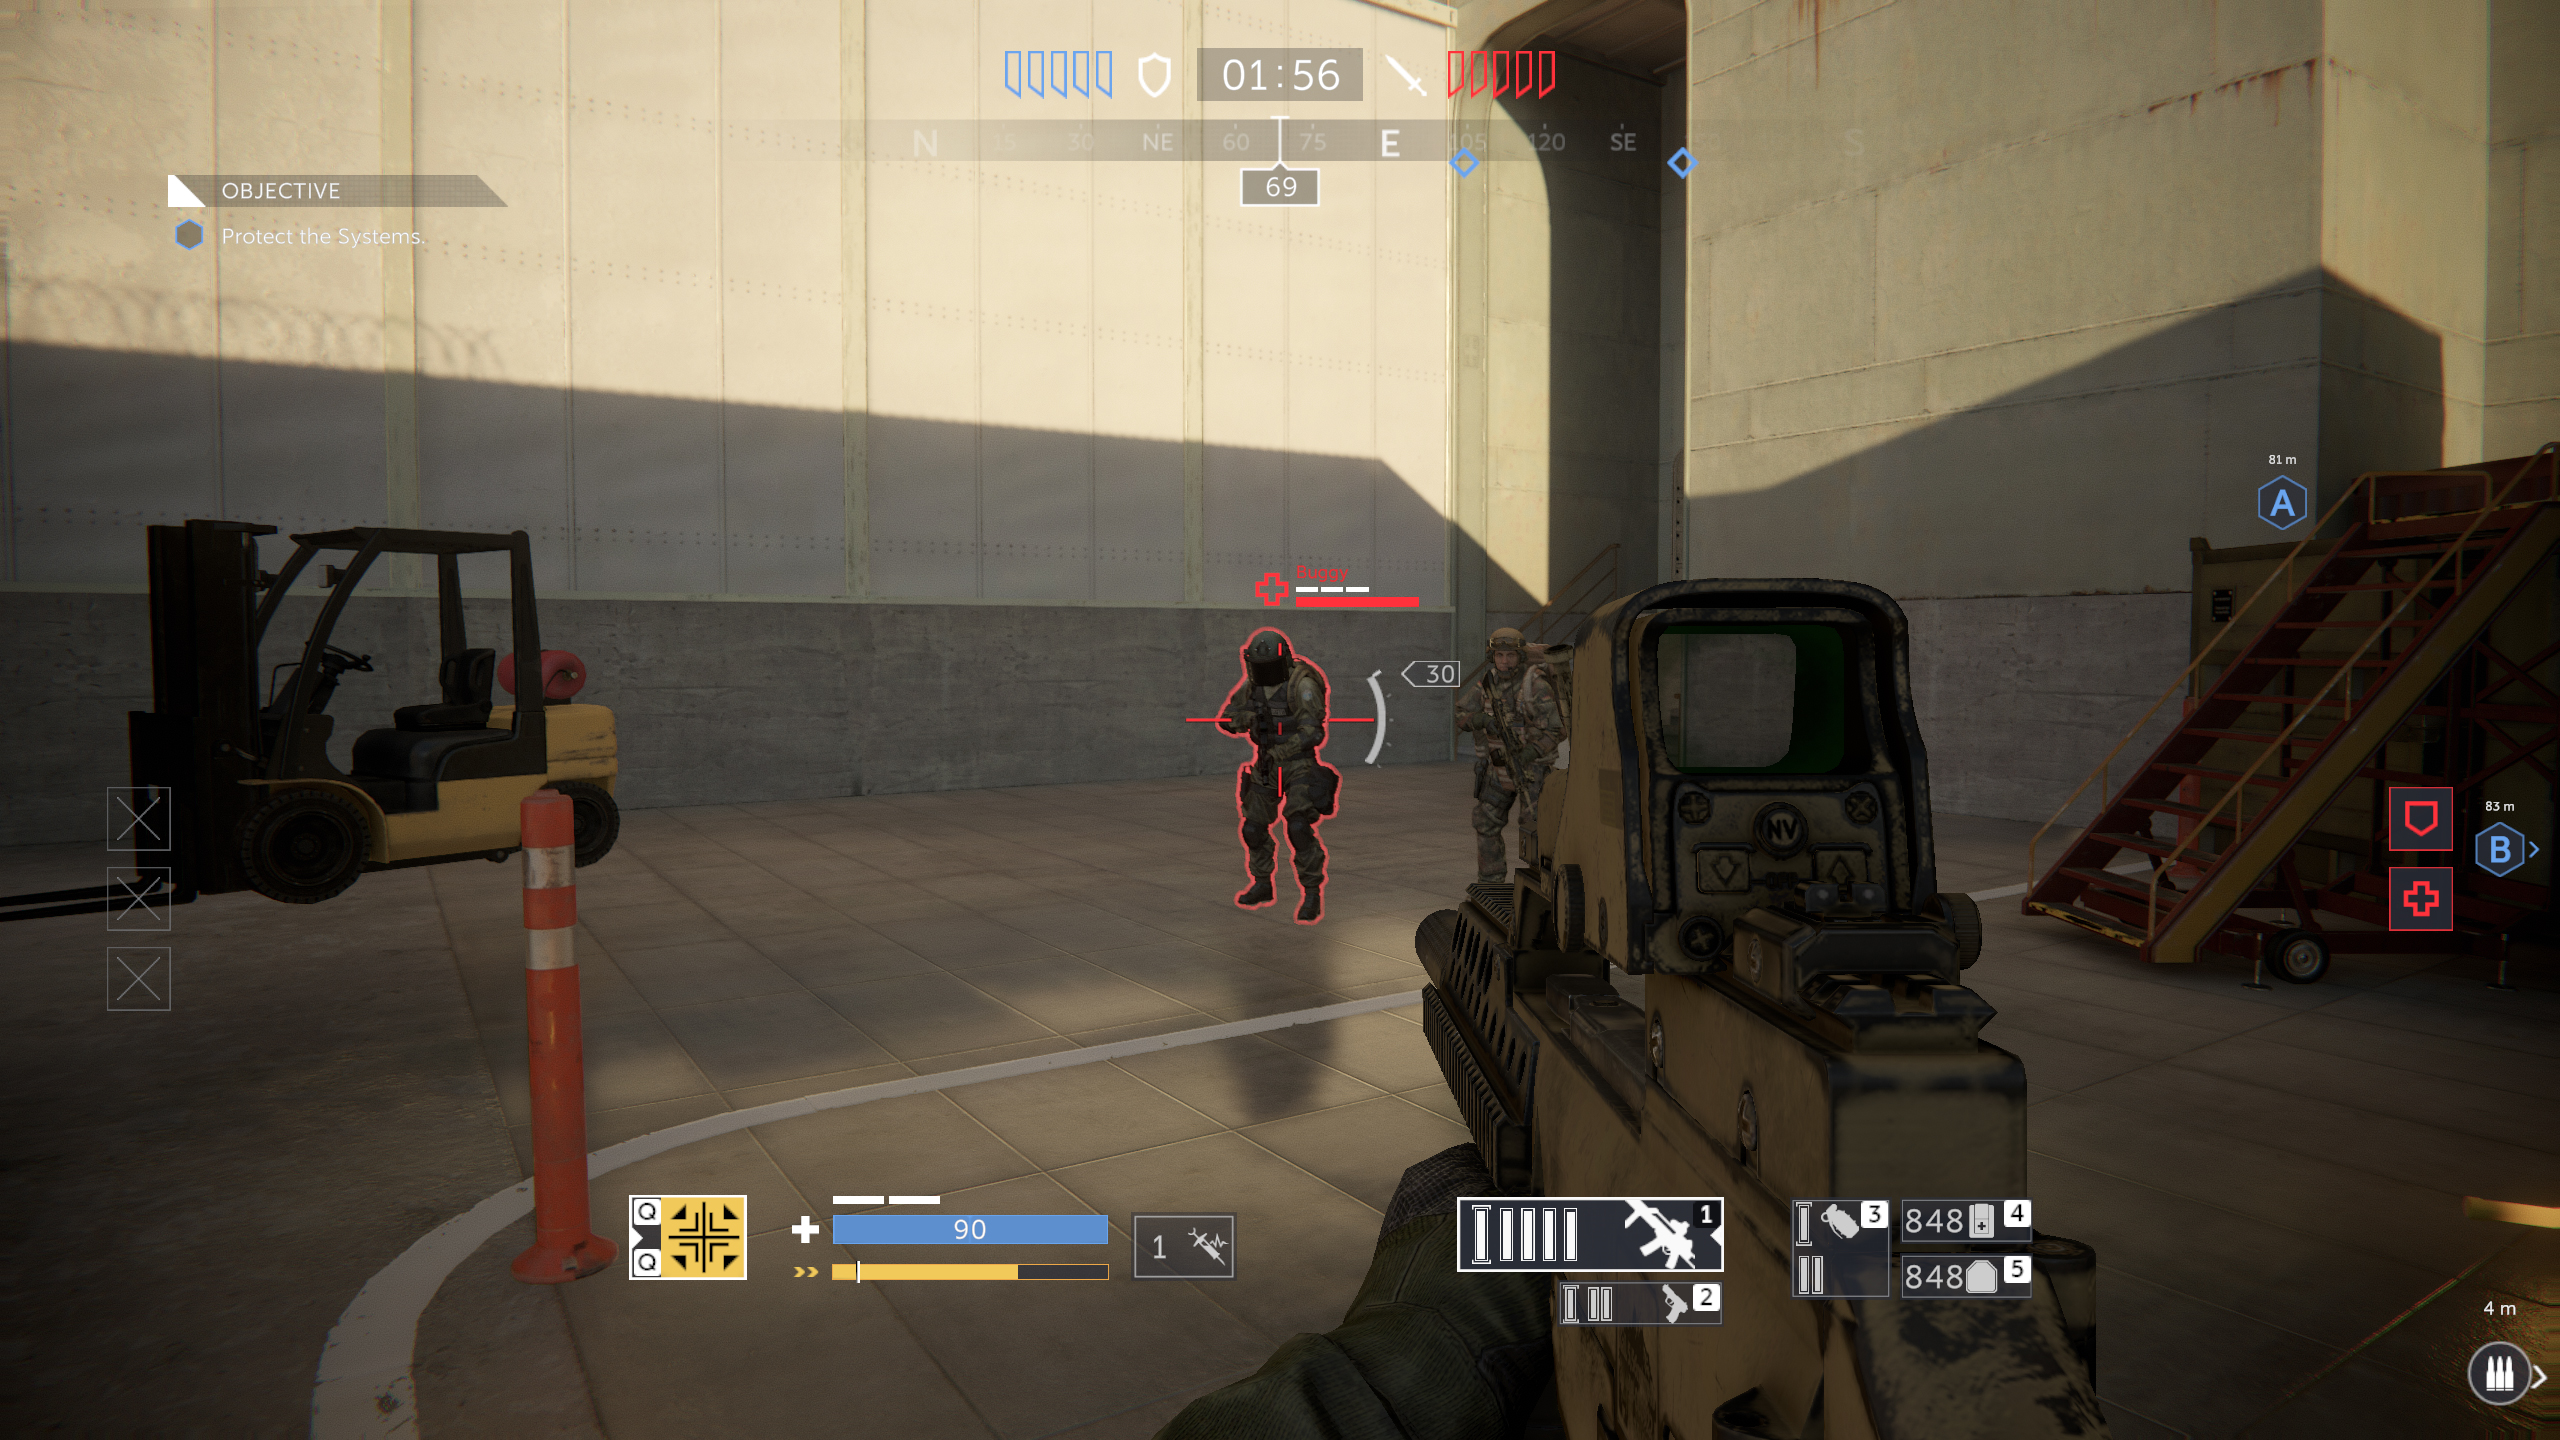  Indication example with a crosshair pointing at the enemy.